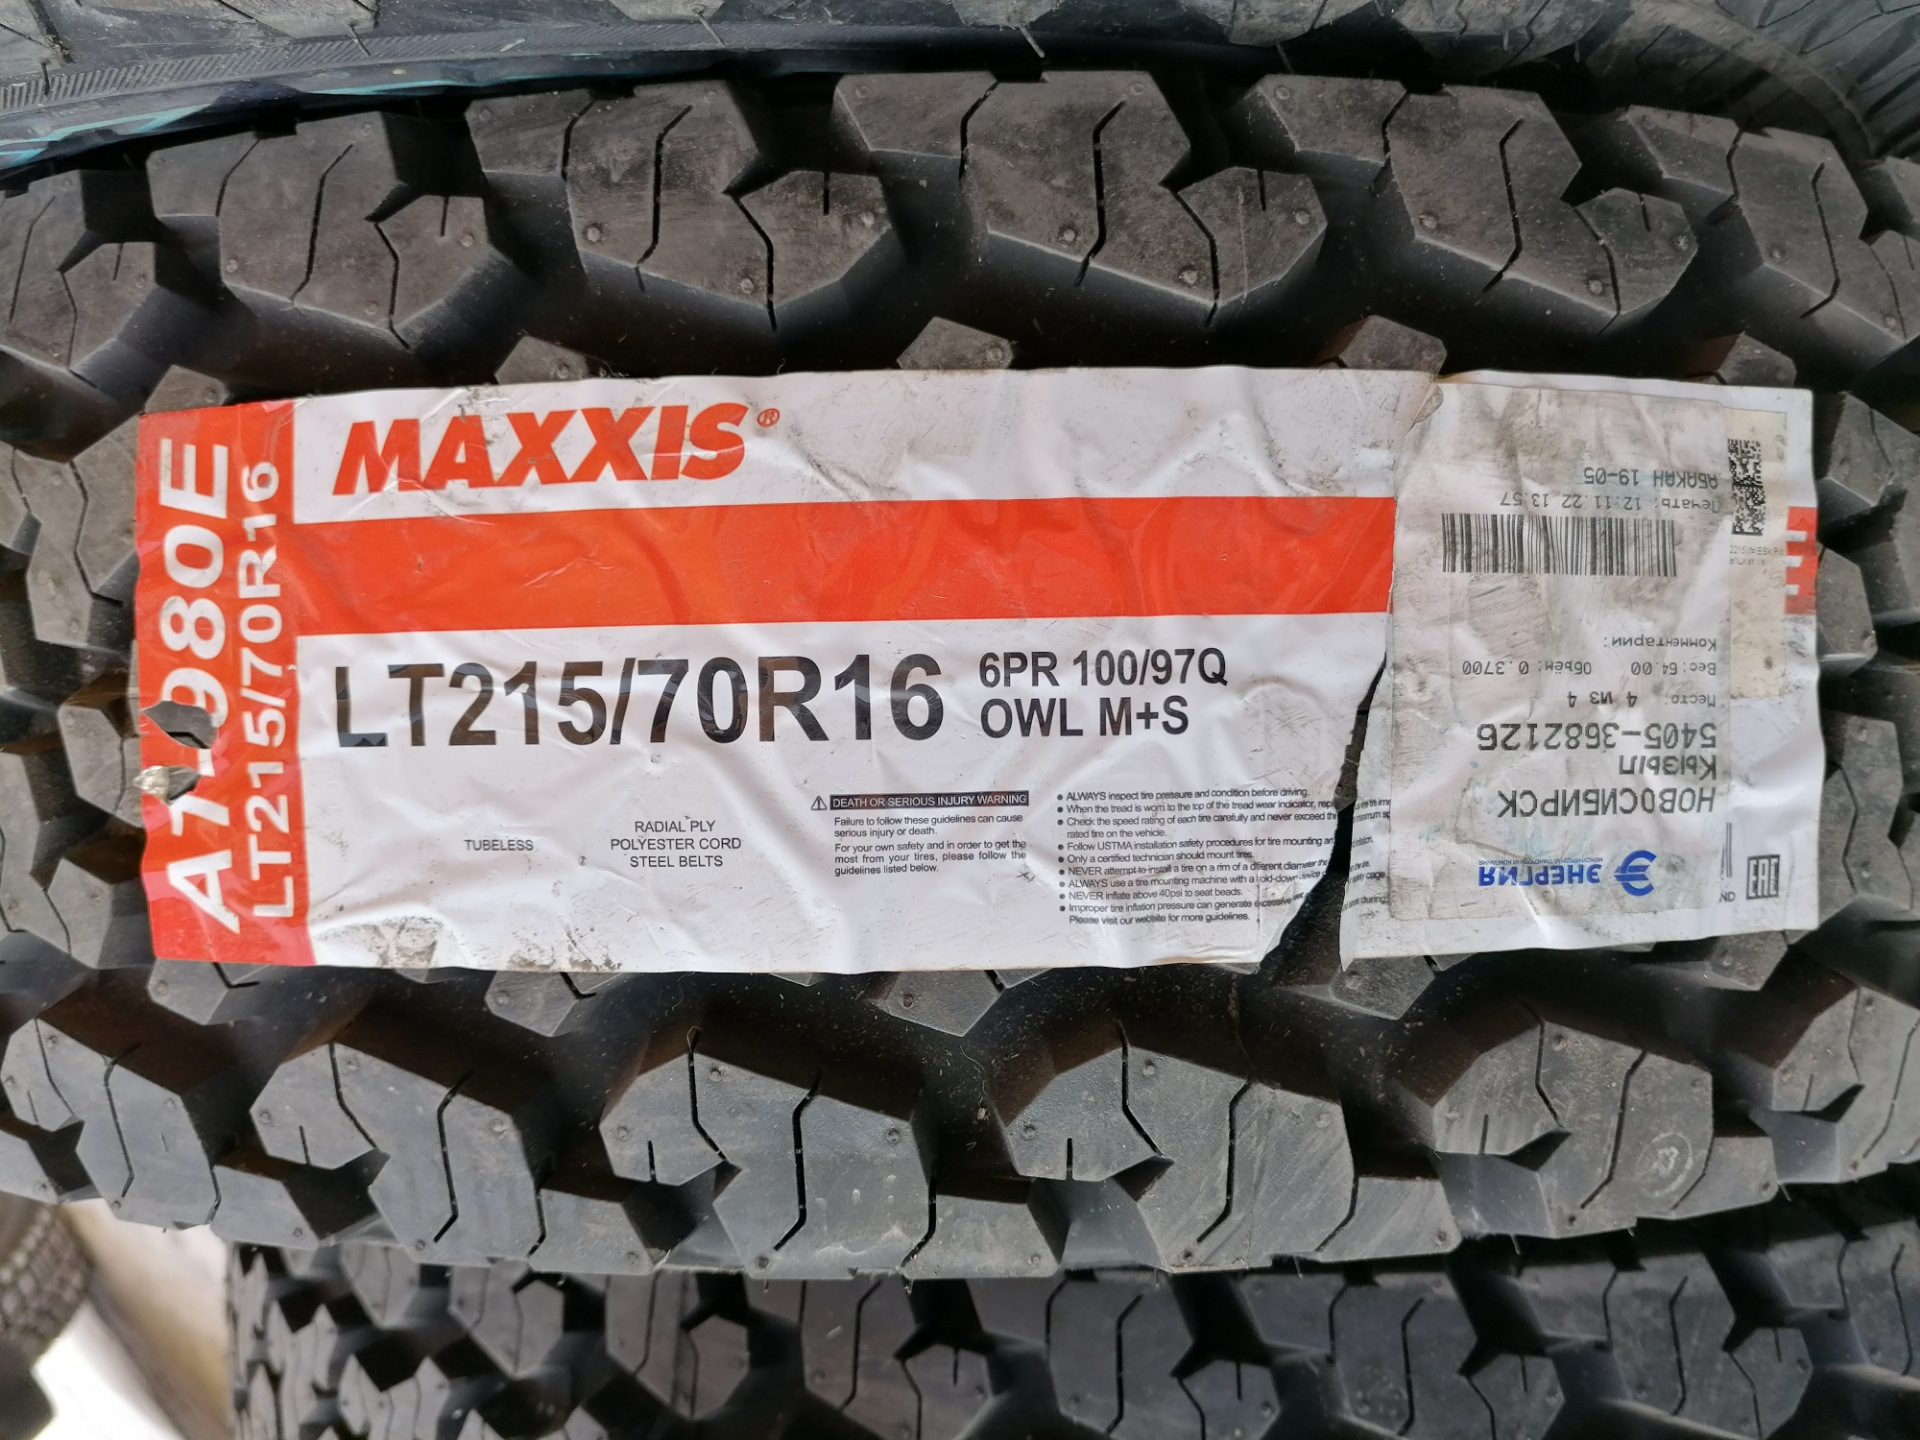 Maxxis at-980e worm-Drive. Maxxis at-980 worm-Drive. Максис АТ 980. Worm Drive 980 Maxxis.